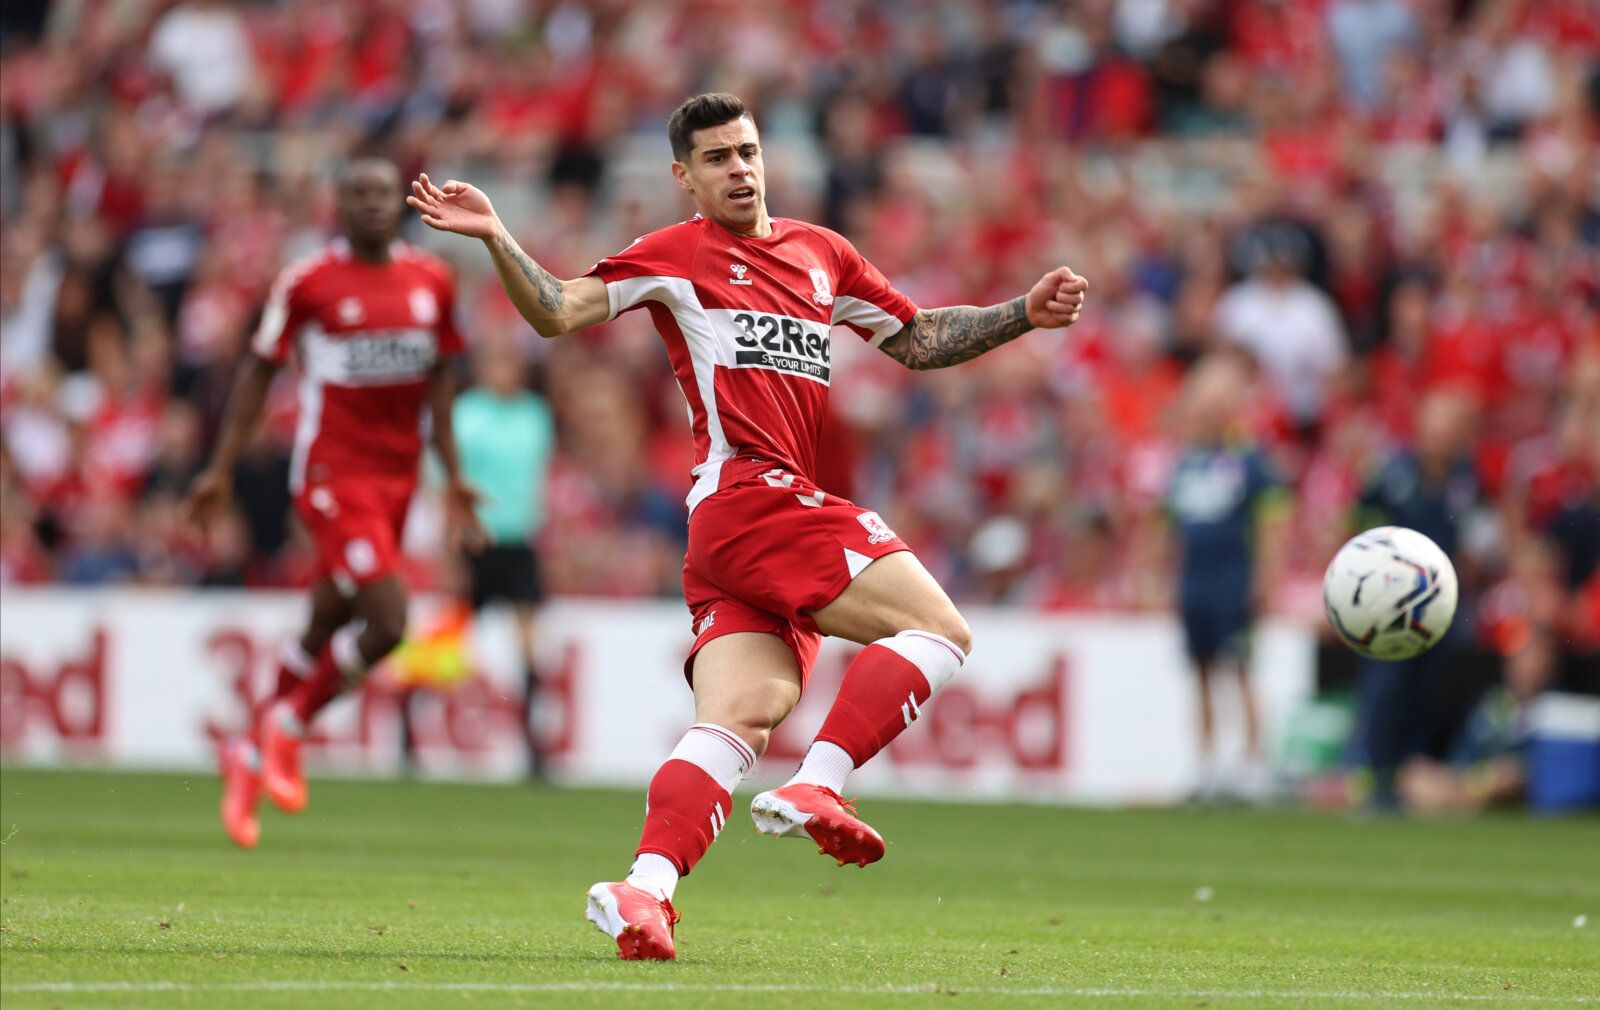 Soccer Football - Championship - Middlesbrough v Bristol City - Riverside Stadium, Middlesbrough, Britain - August 14, 2021 Middlesbrough's Martin Payero in action Action Images/Lee Smith EDITORIAL USE ONLY. No use with unauthorized audio, video, data, fixture lists, club/league logos or 'live' services. Online in-match use limited to 75 images, no video emulation. No use in betting, games or single club /league/player publications.  Please contact your account representative for further details